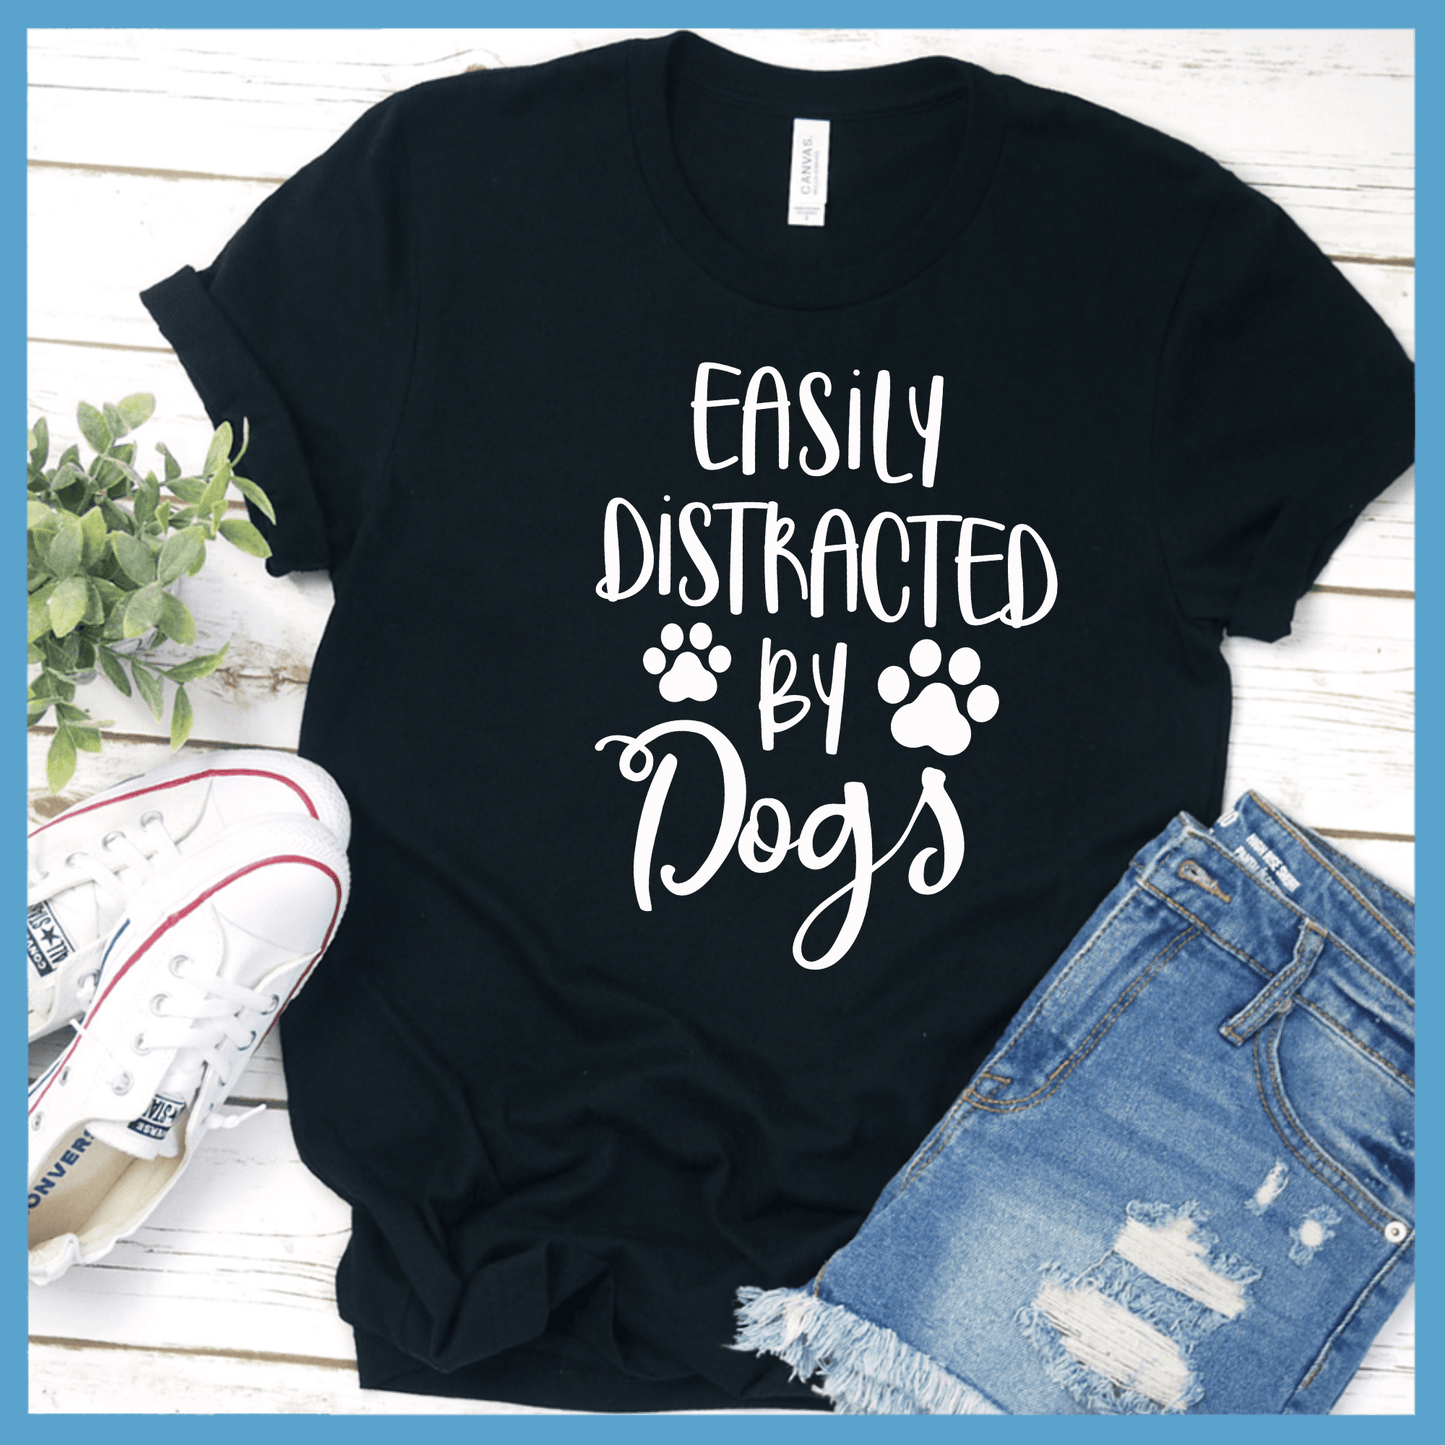 Easily Distracted By Dogs T-Shirt